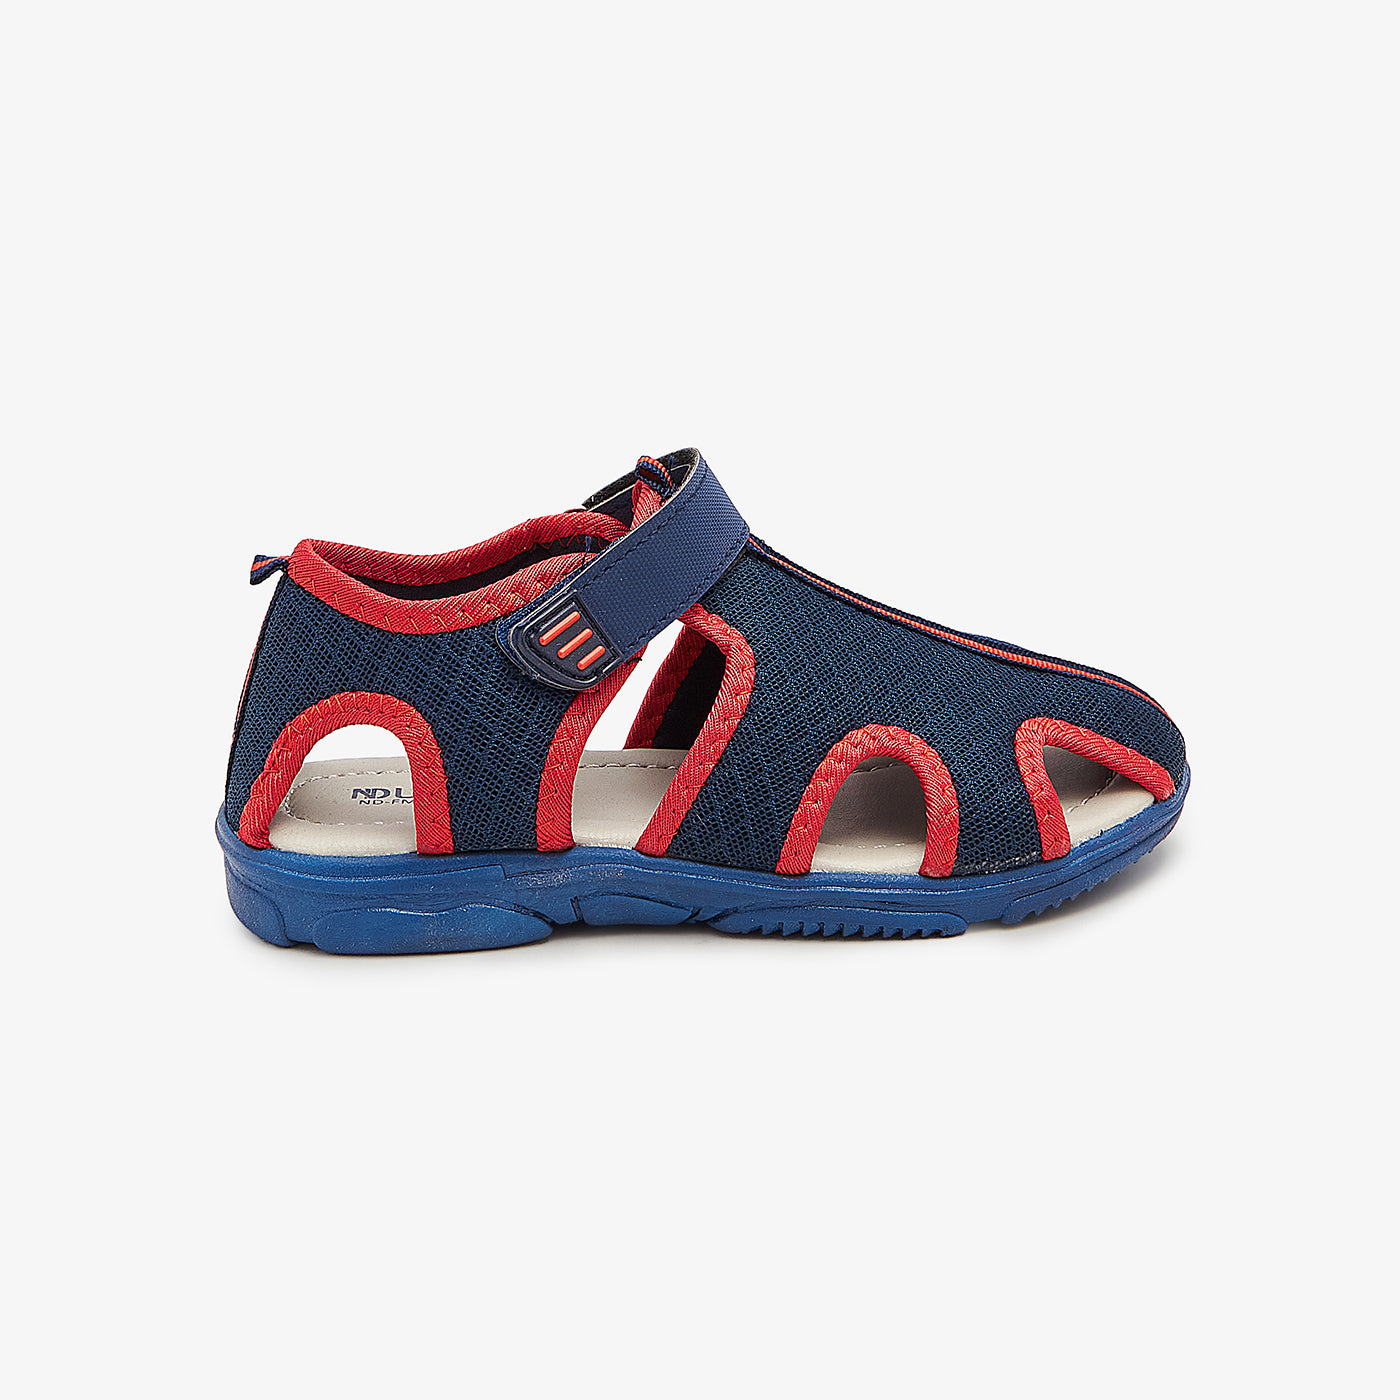 Best stylish sandals for kids